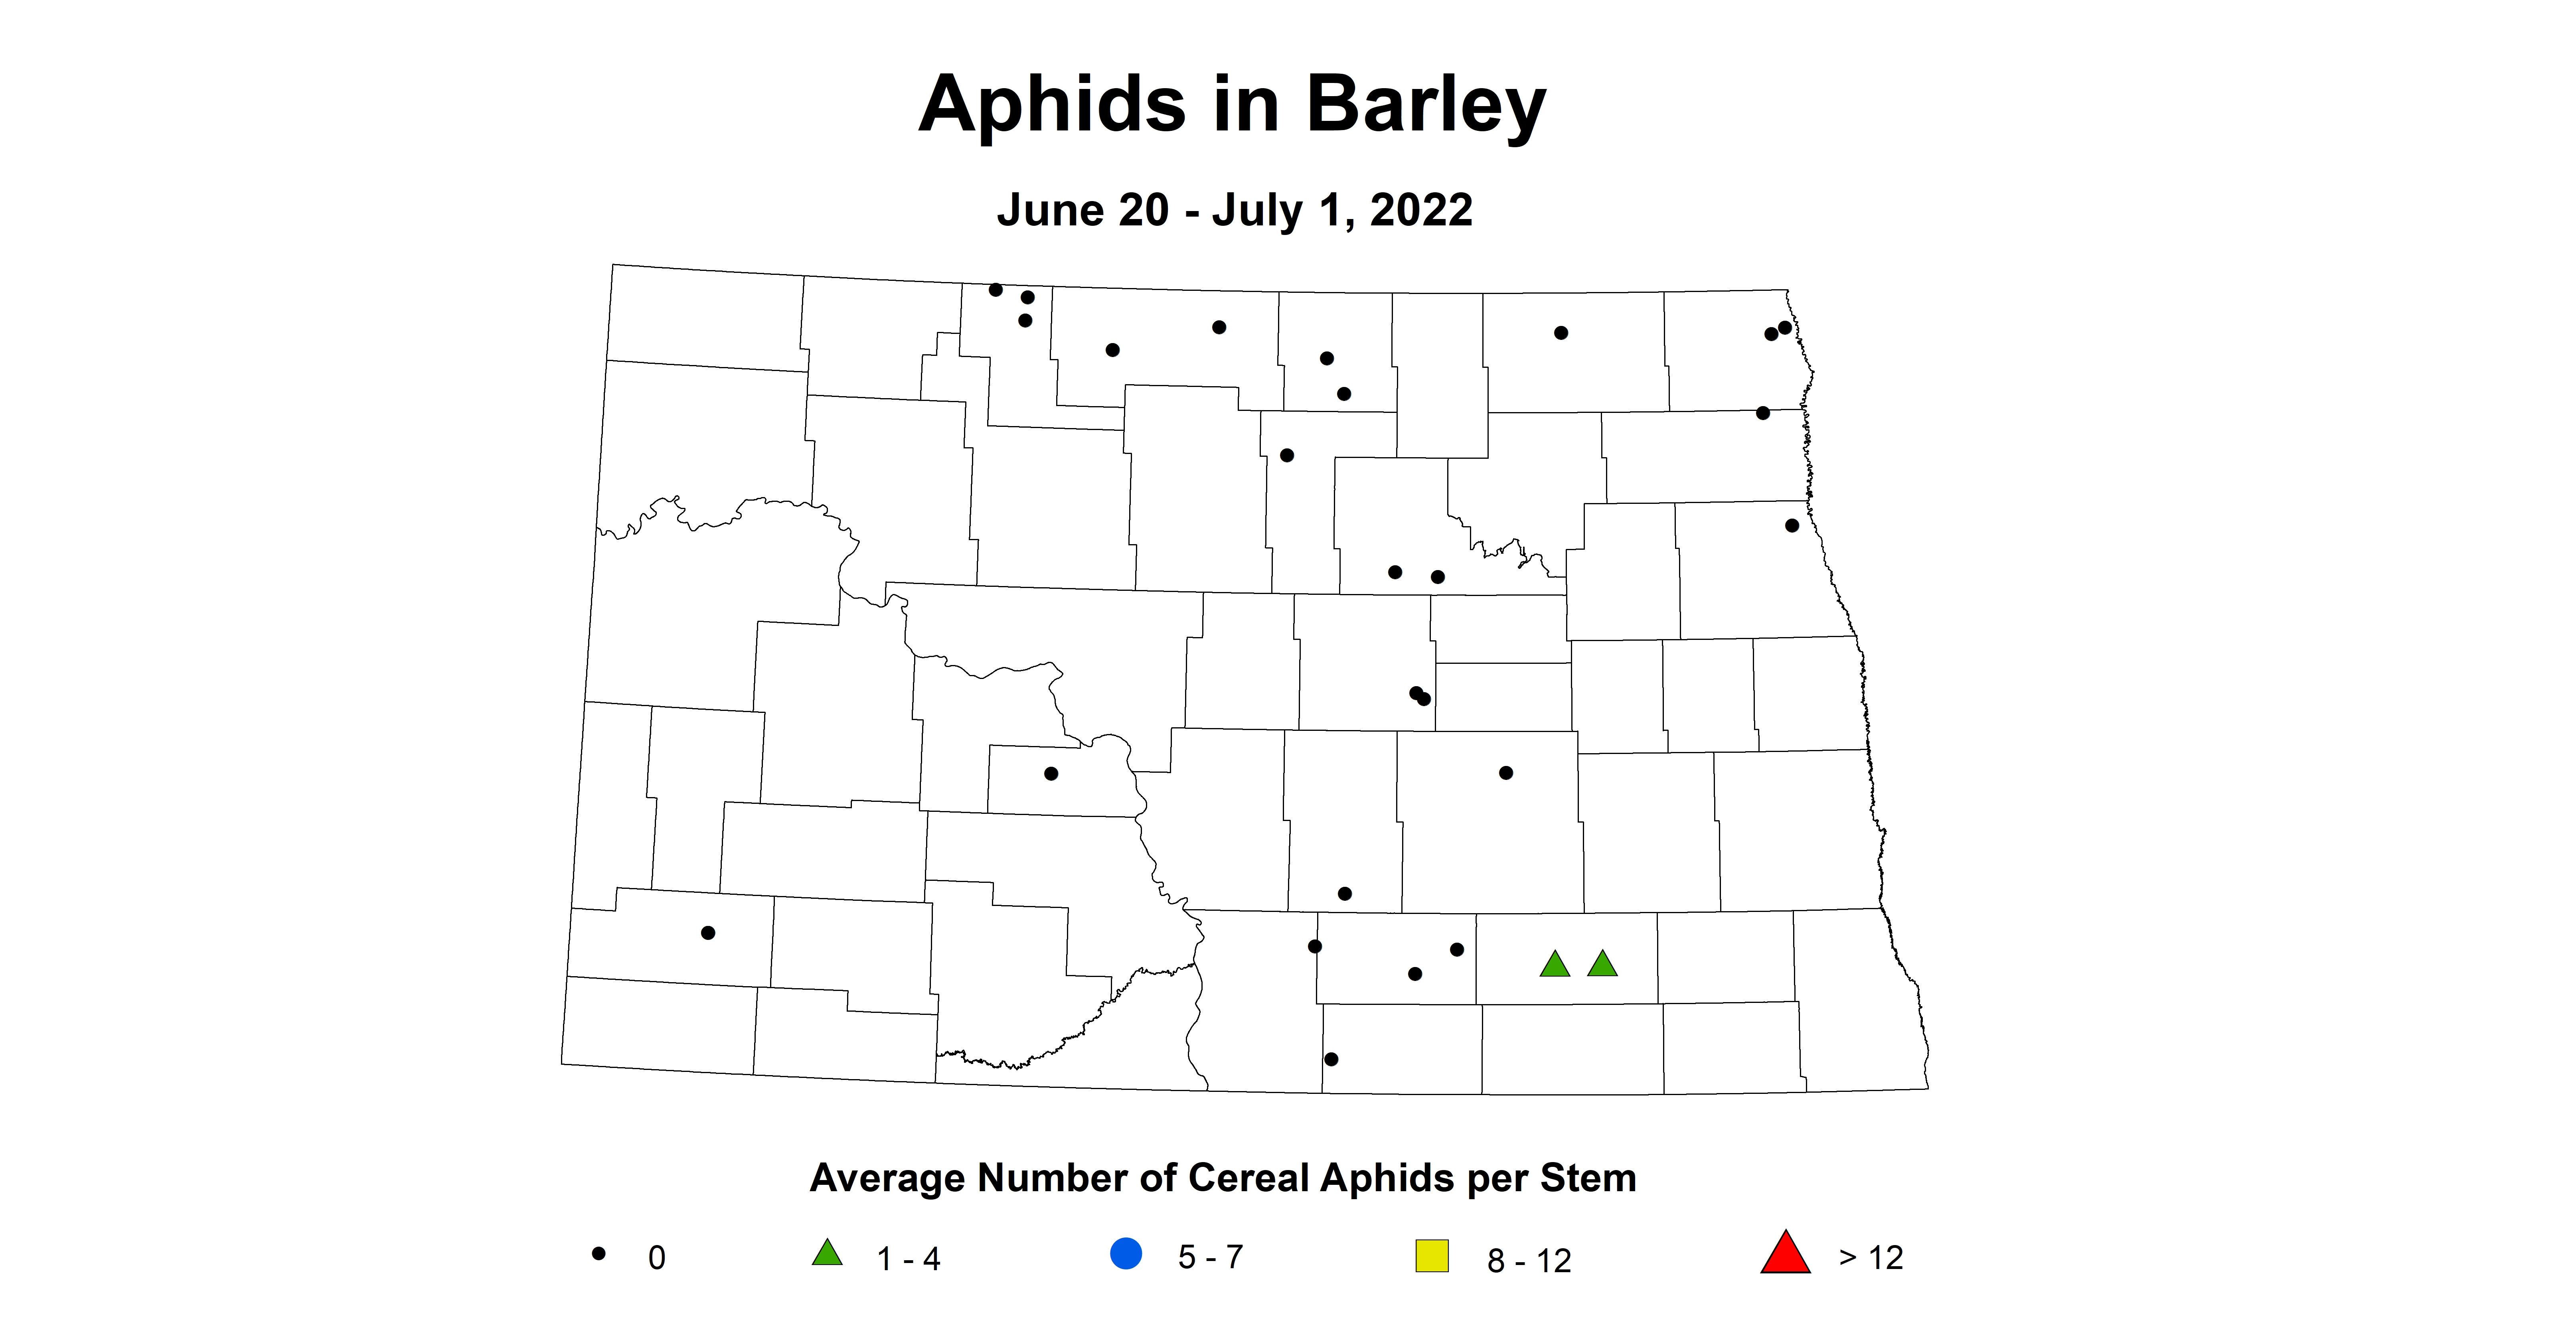 ND IPM map of barley aphids June 20 to July 1 2022